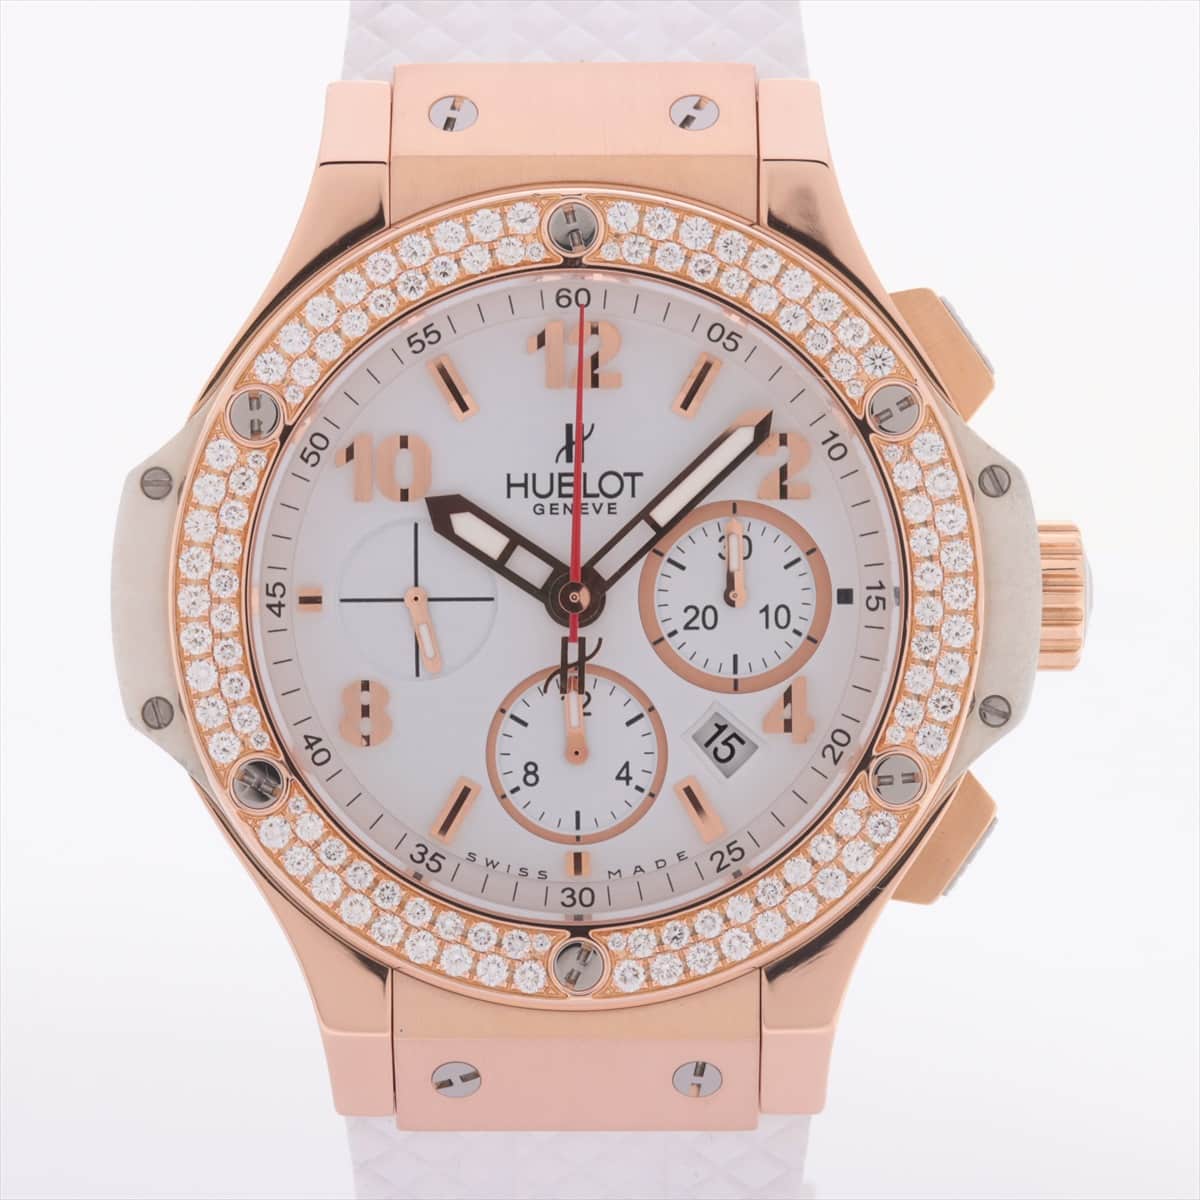 [Chrono] Hublot Big bang 301.PE.230.RW.114 750 x TI x rubber AT White-Face Watch strap with a scent of perfume